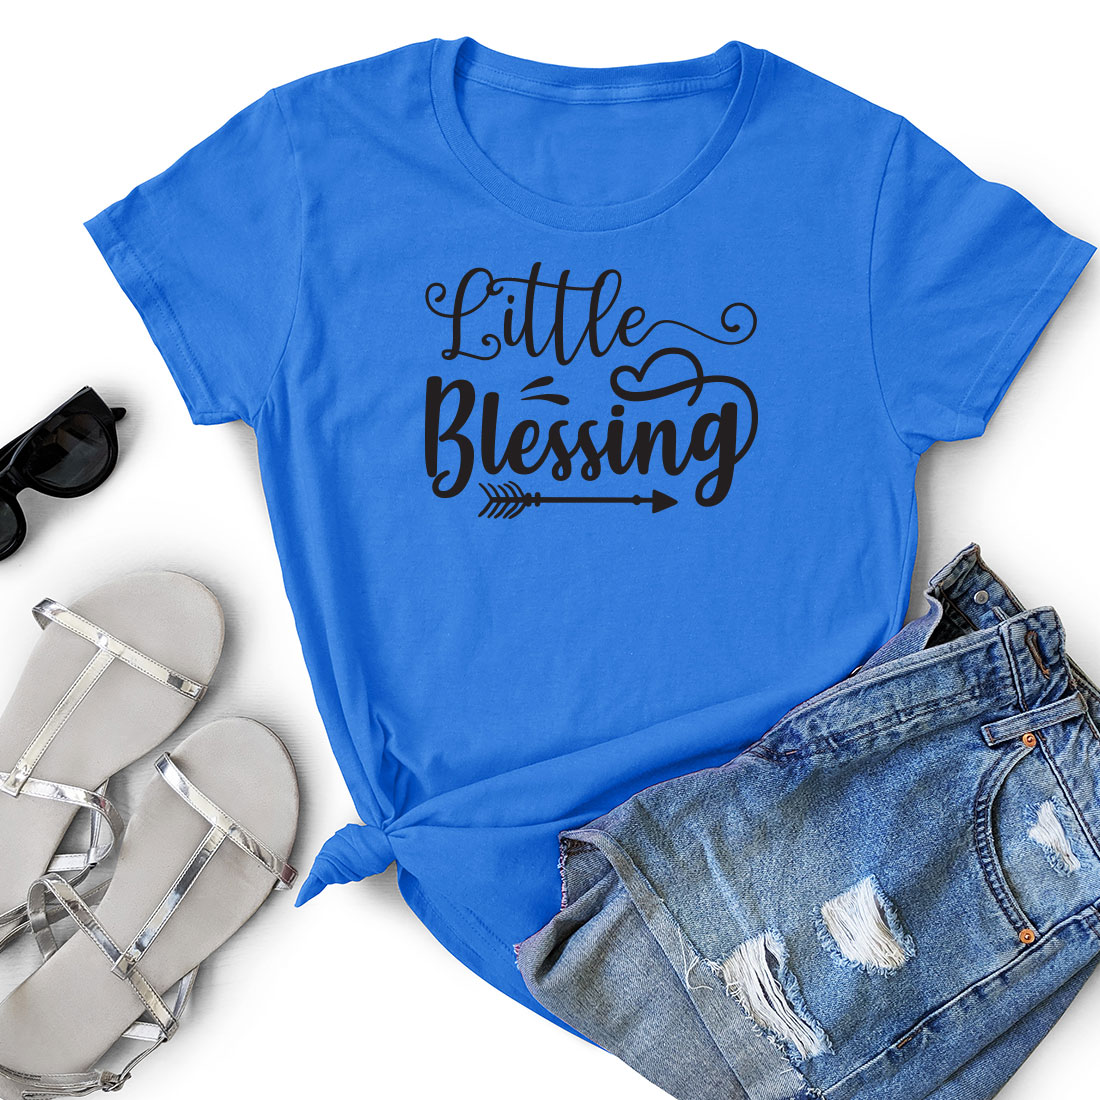 Blue shirt that says little blessing next to a pair of shorts.